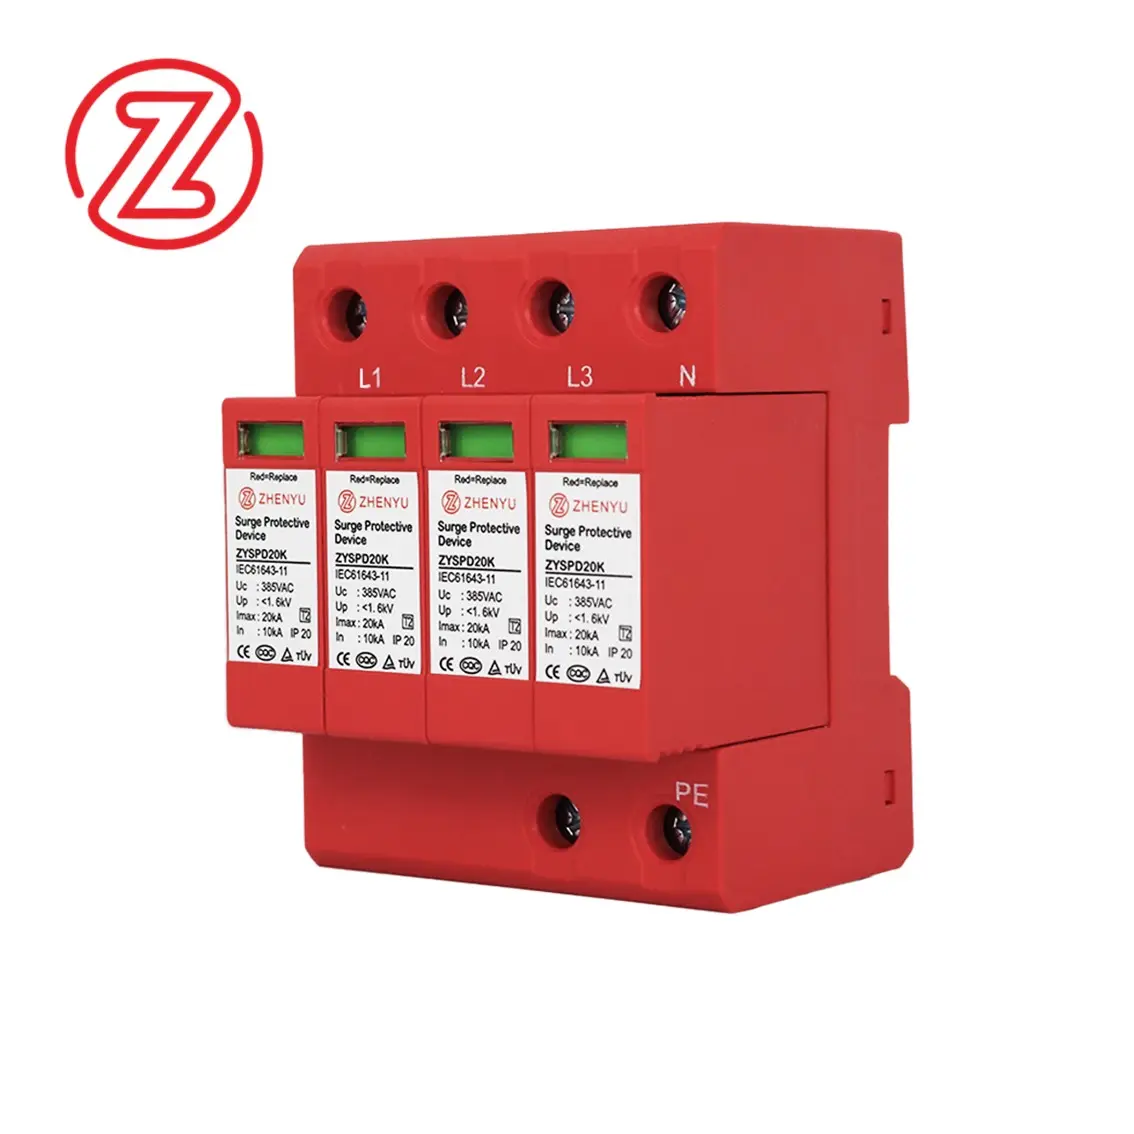 ZHENYU CE TUV CQC Certified SPD T2 150V 275V 385V 420V 20KA B4 lightning protection system Surge Protection for AC Power